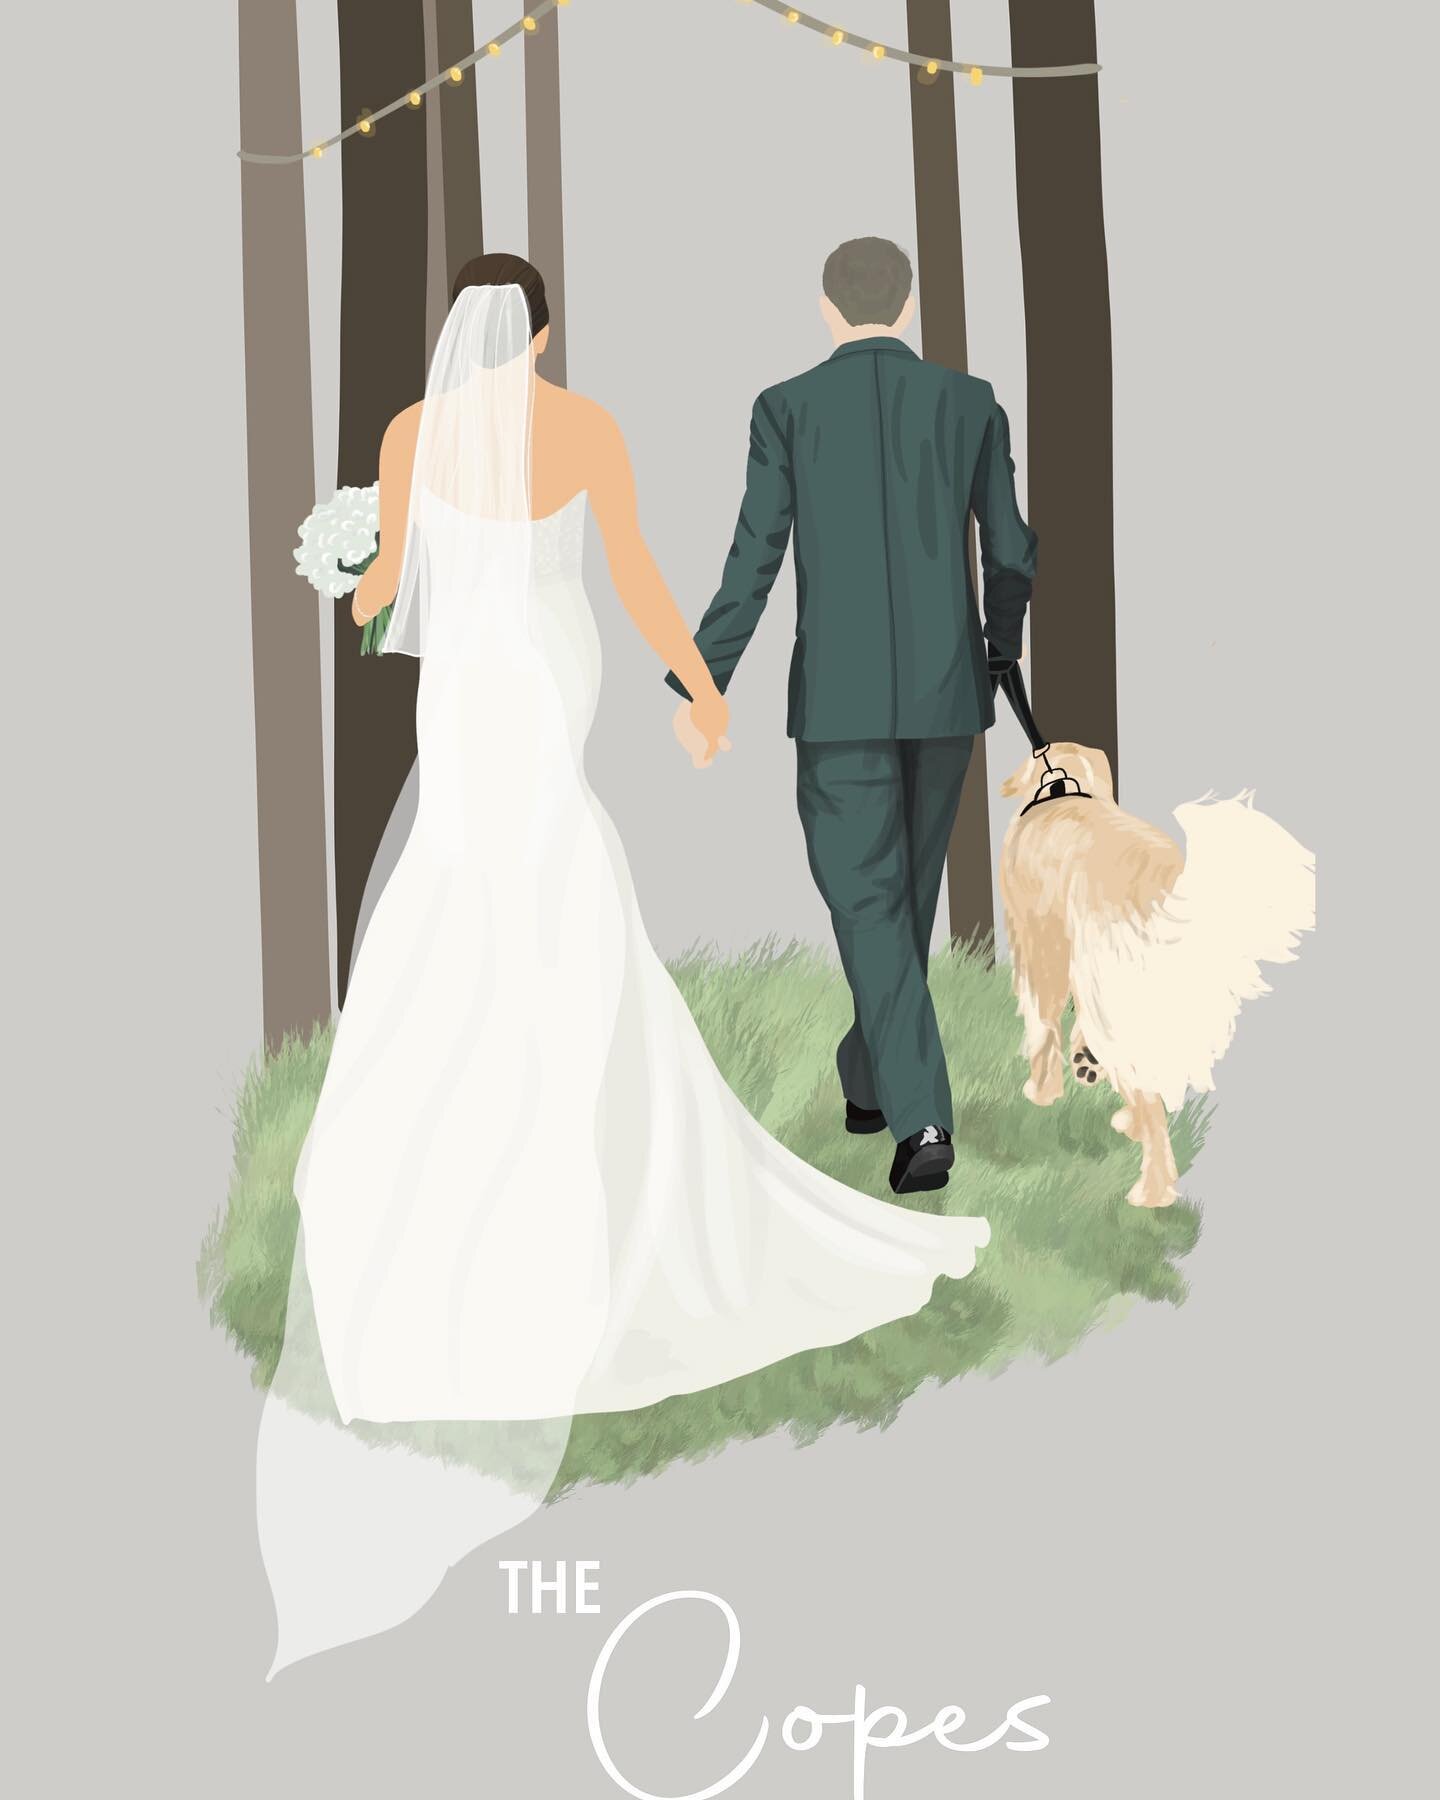 Custom wedding gift fornthis beautiful couple and their pup 🥰